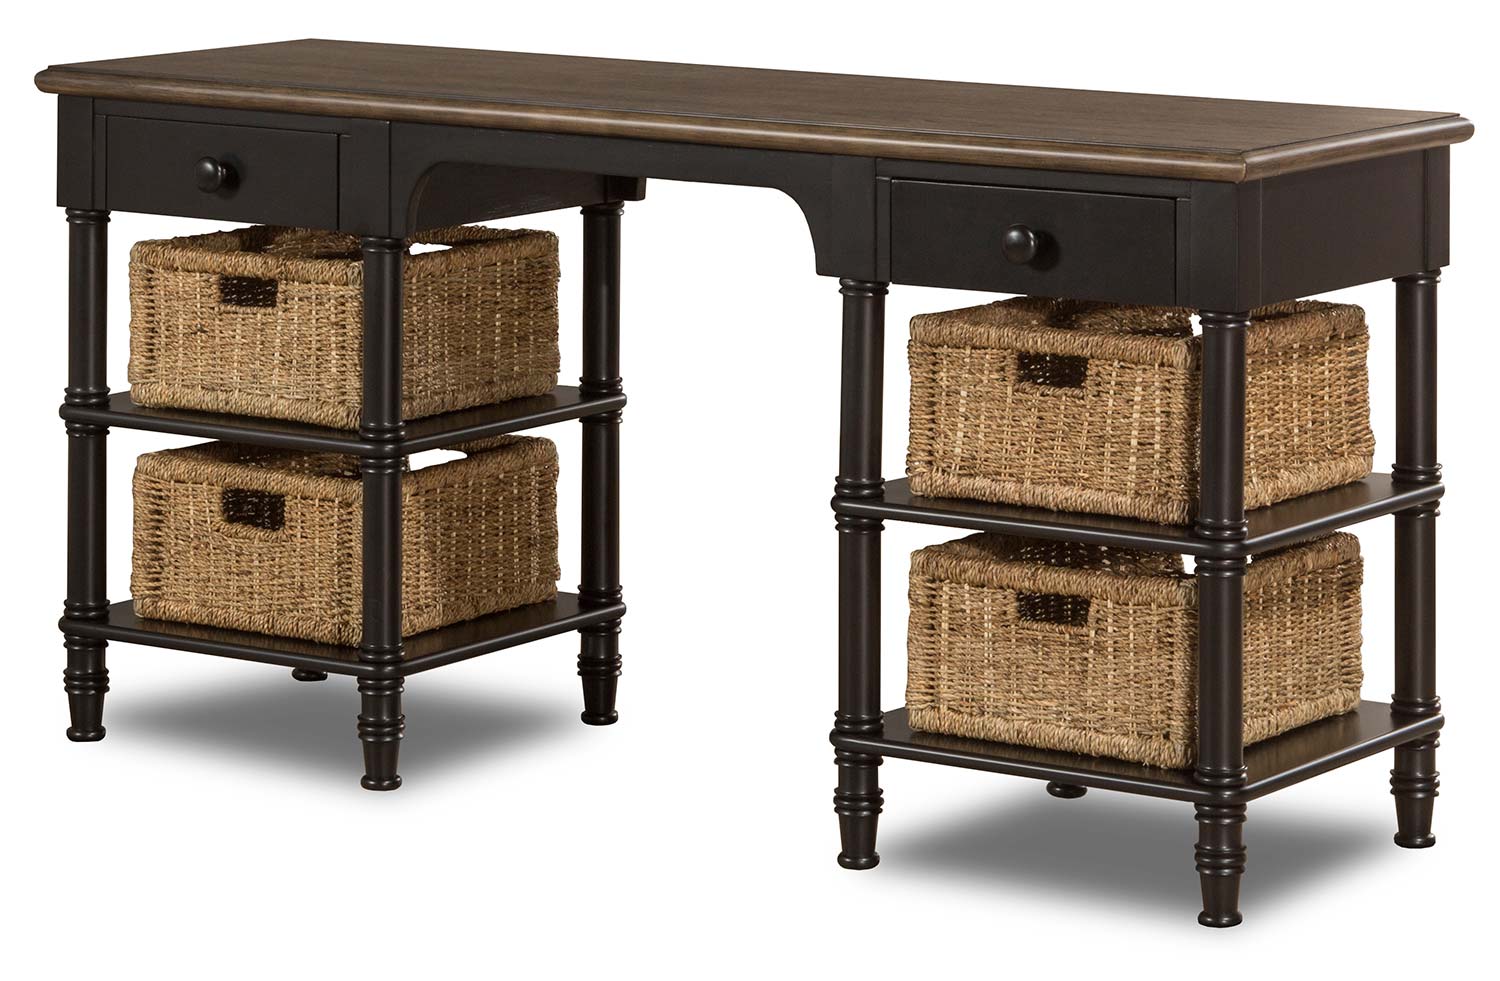 Hillsdale Seneca Desk with 4 Baskets - Waxed Black/Natural Seagrass